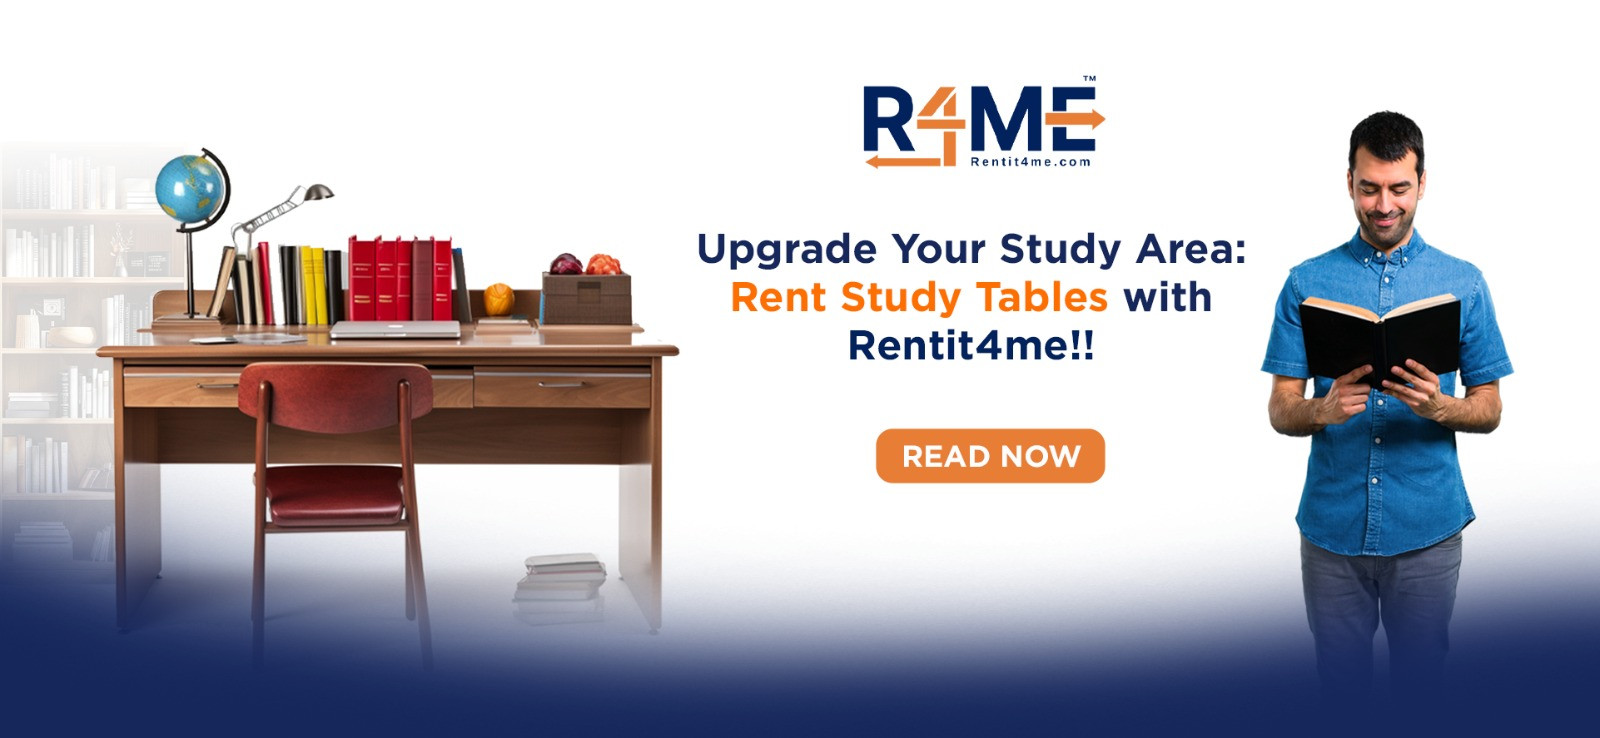 Upgrade Your Study Area: Rent Study Tables with Rentit4me